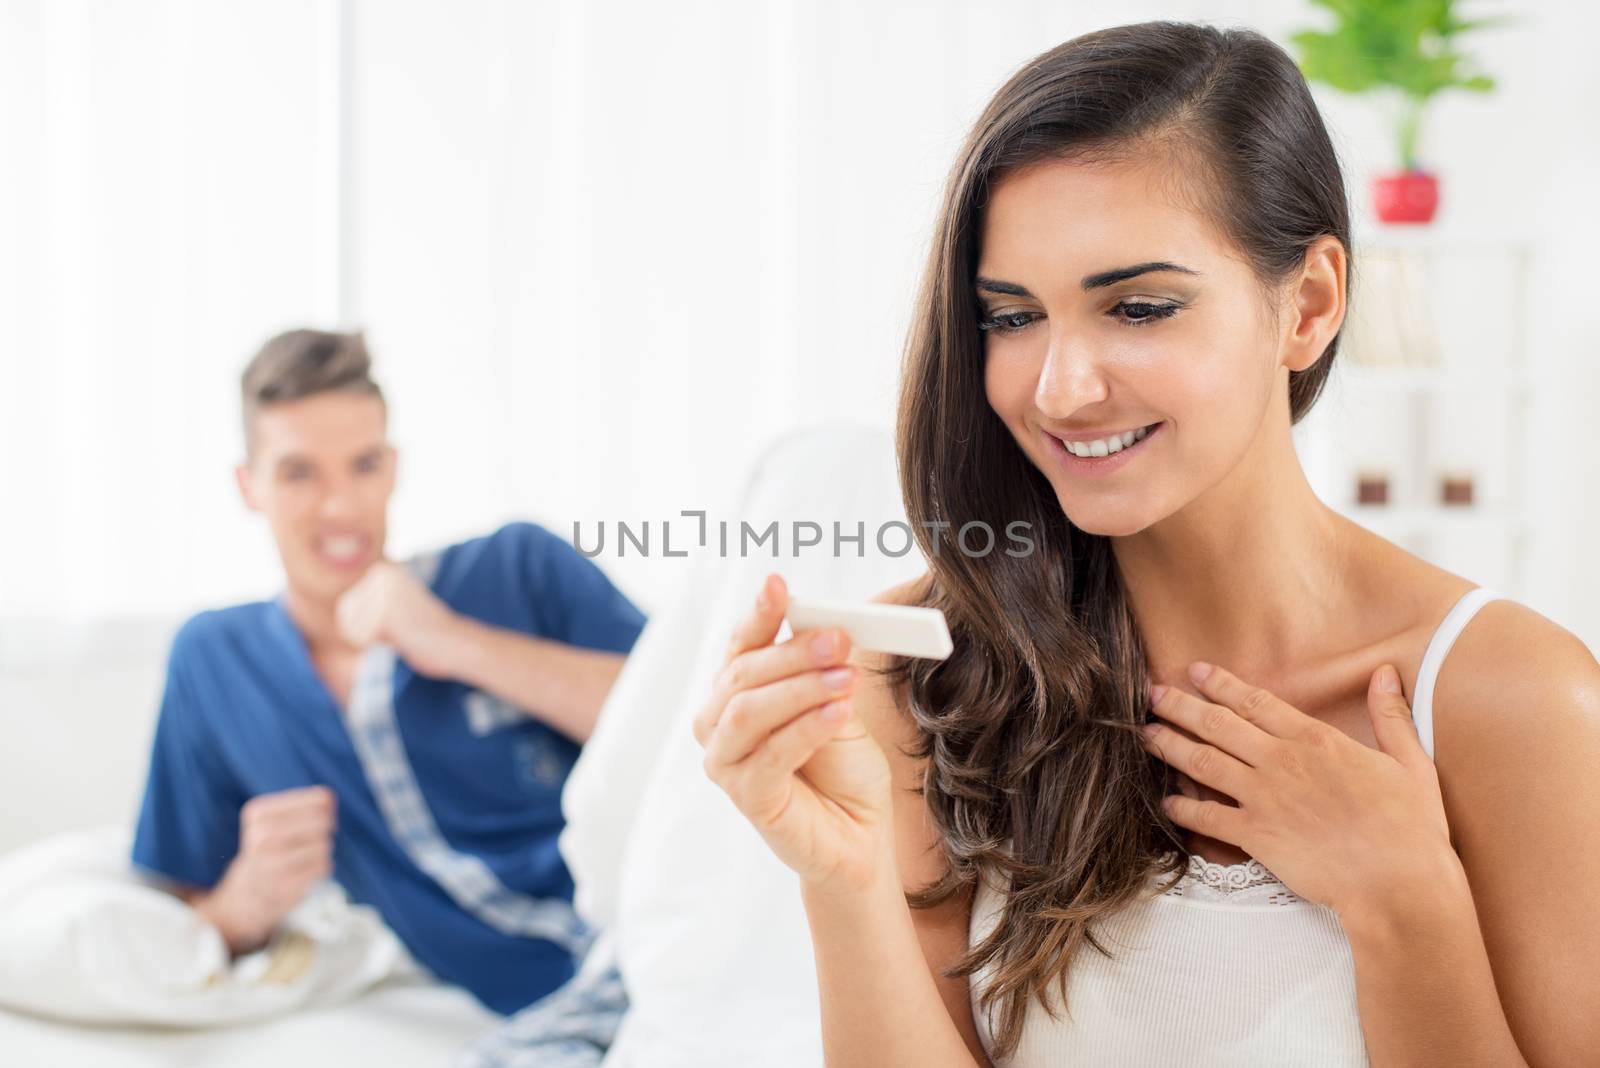 A young woman sits on a bed with a happy expression on her face looking at a pregnancy test, while in the background see her partner who is happy with the test results.